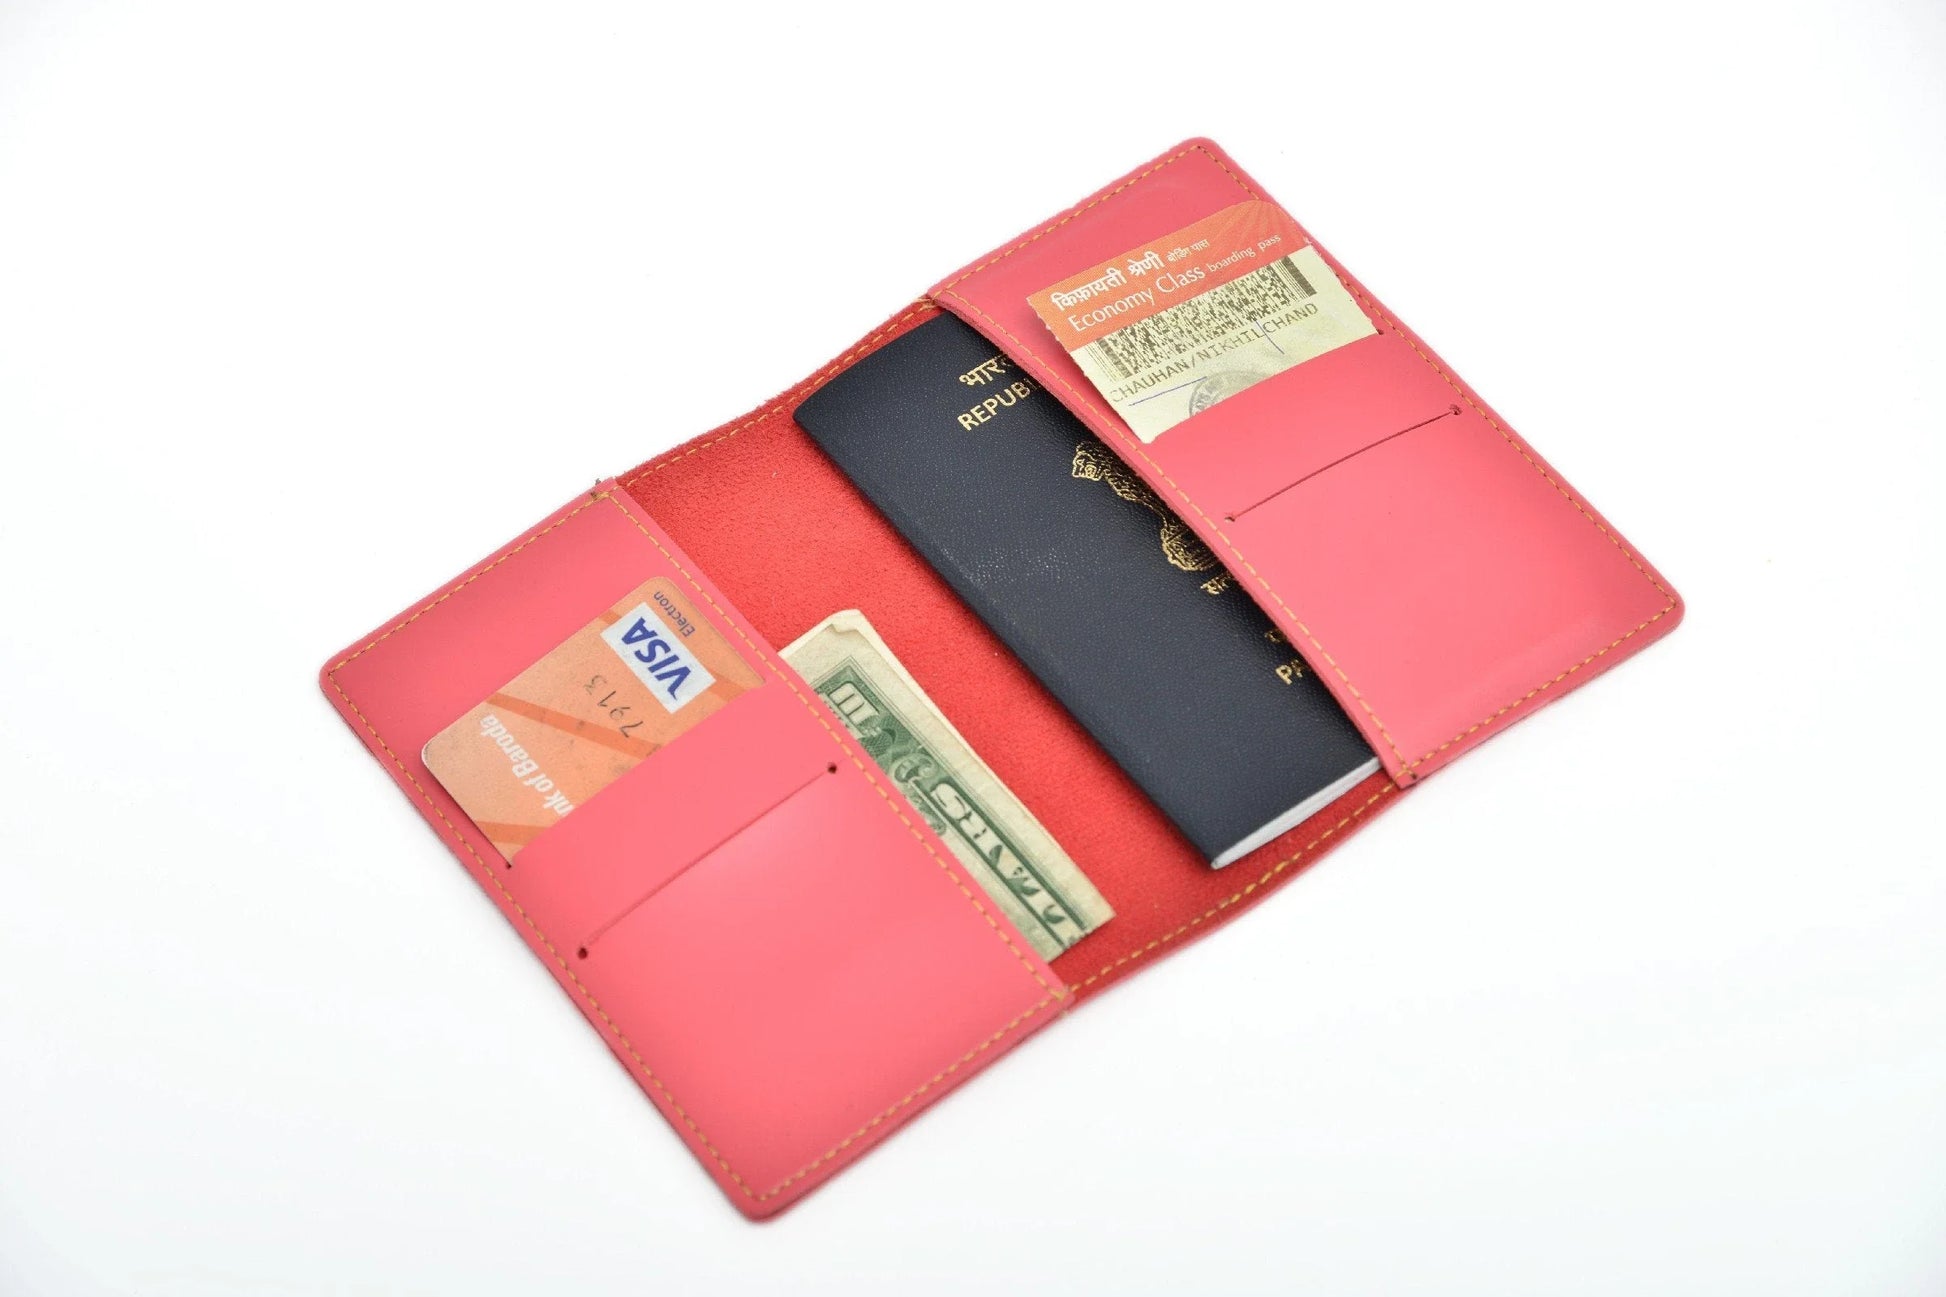 couple-twinning-passport-combo-2-pcs-1-customized-best-gift-for-boyfriend-girlfriend. Inside or open view of couples combo pink passport cover